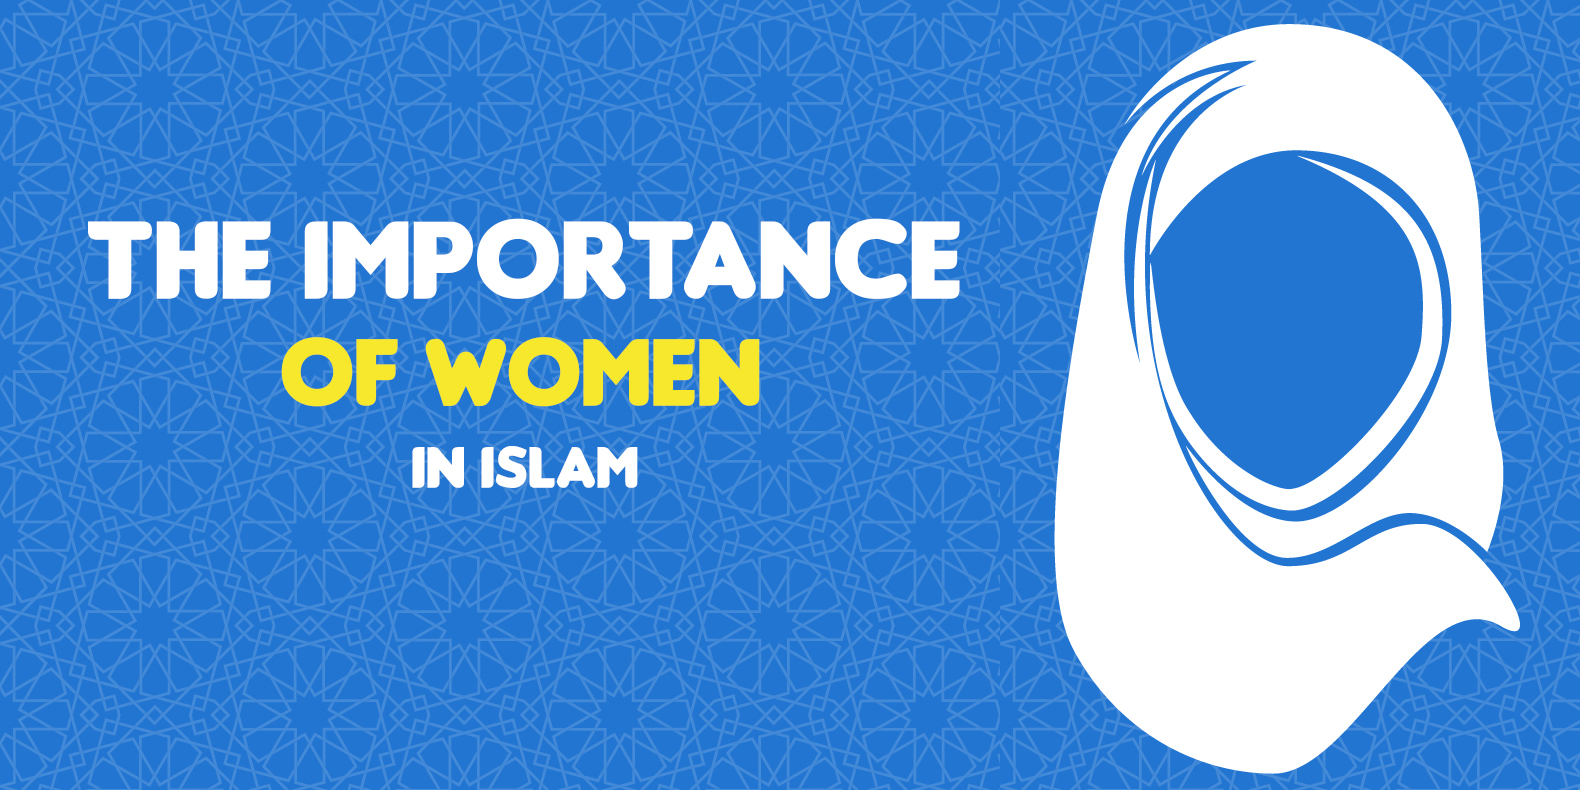 The Importance of Women in Islam